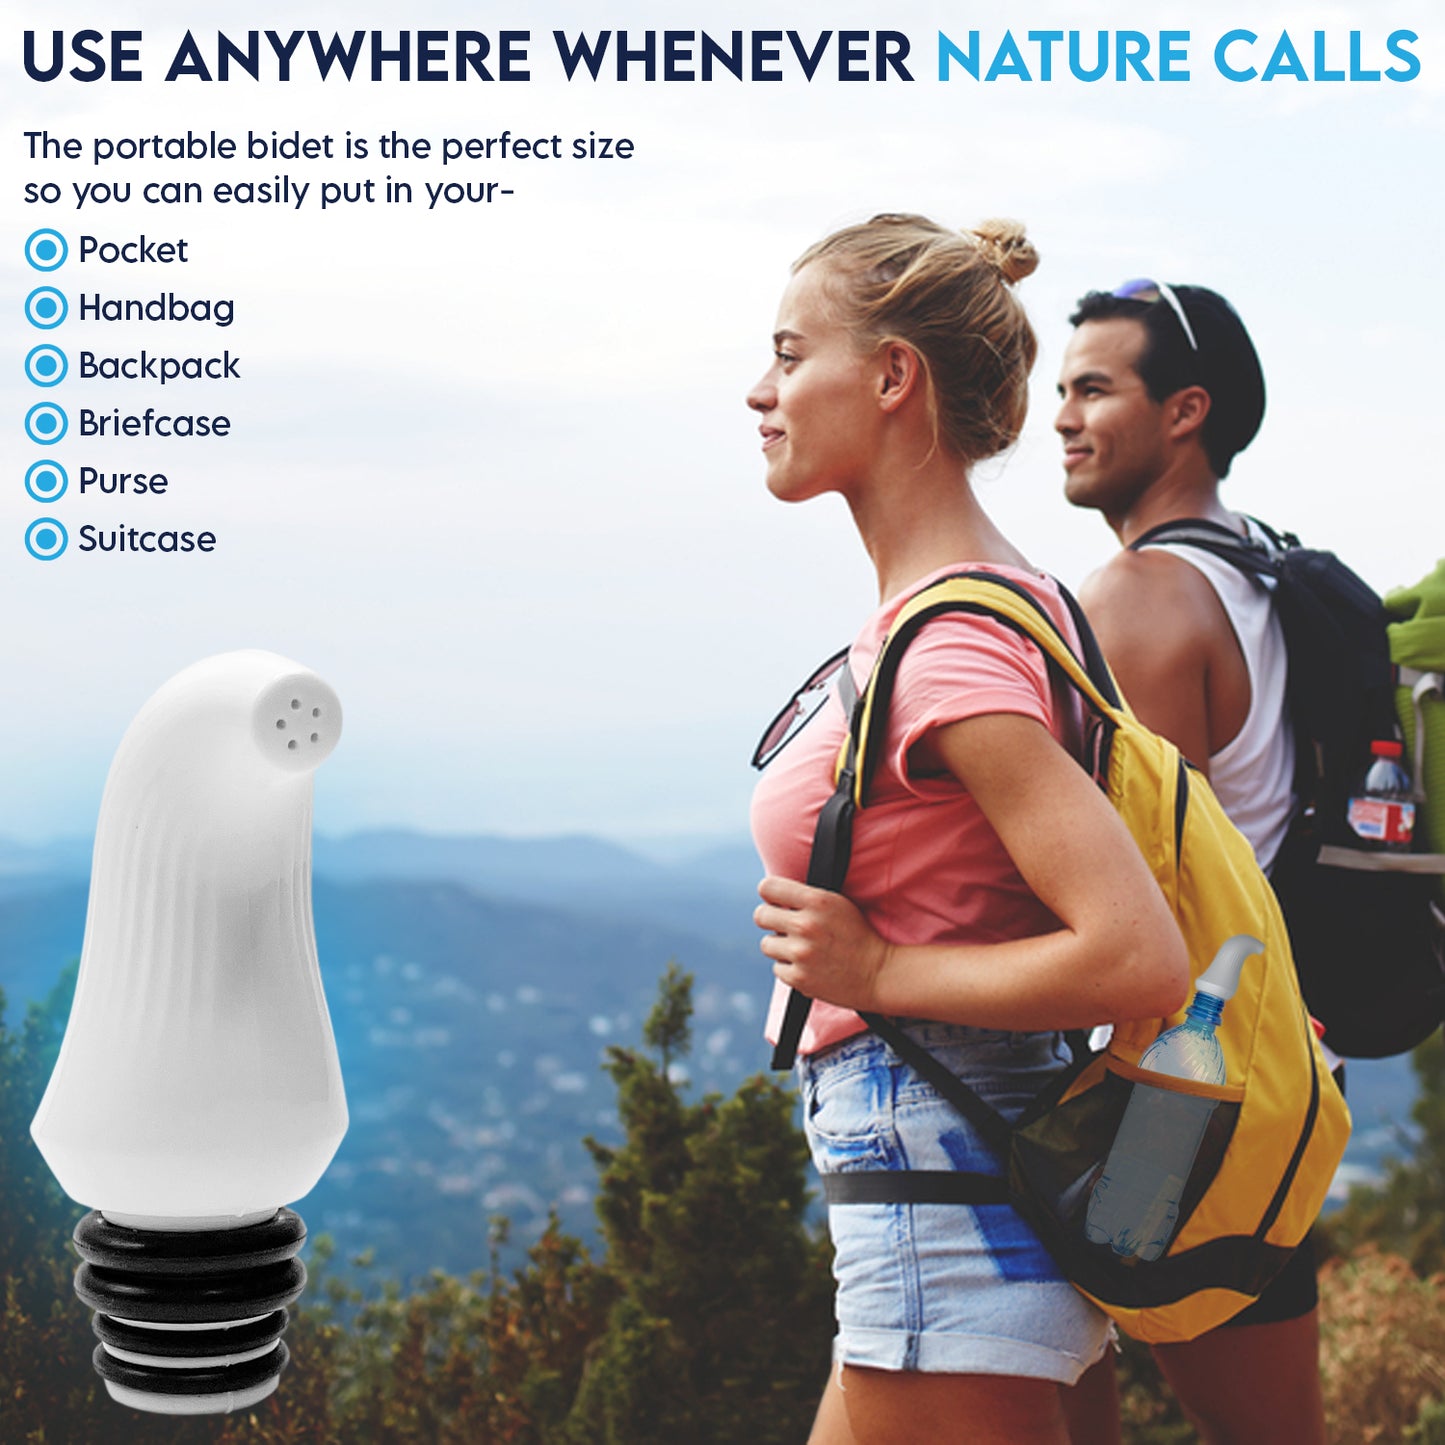 JEP 302 Travel Bidet Portable Bottle for Camping, Backpacking, Outdoors, & More